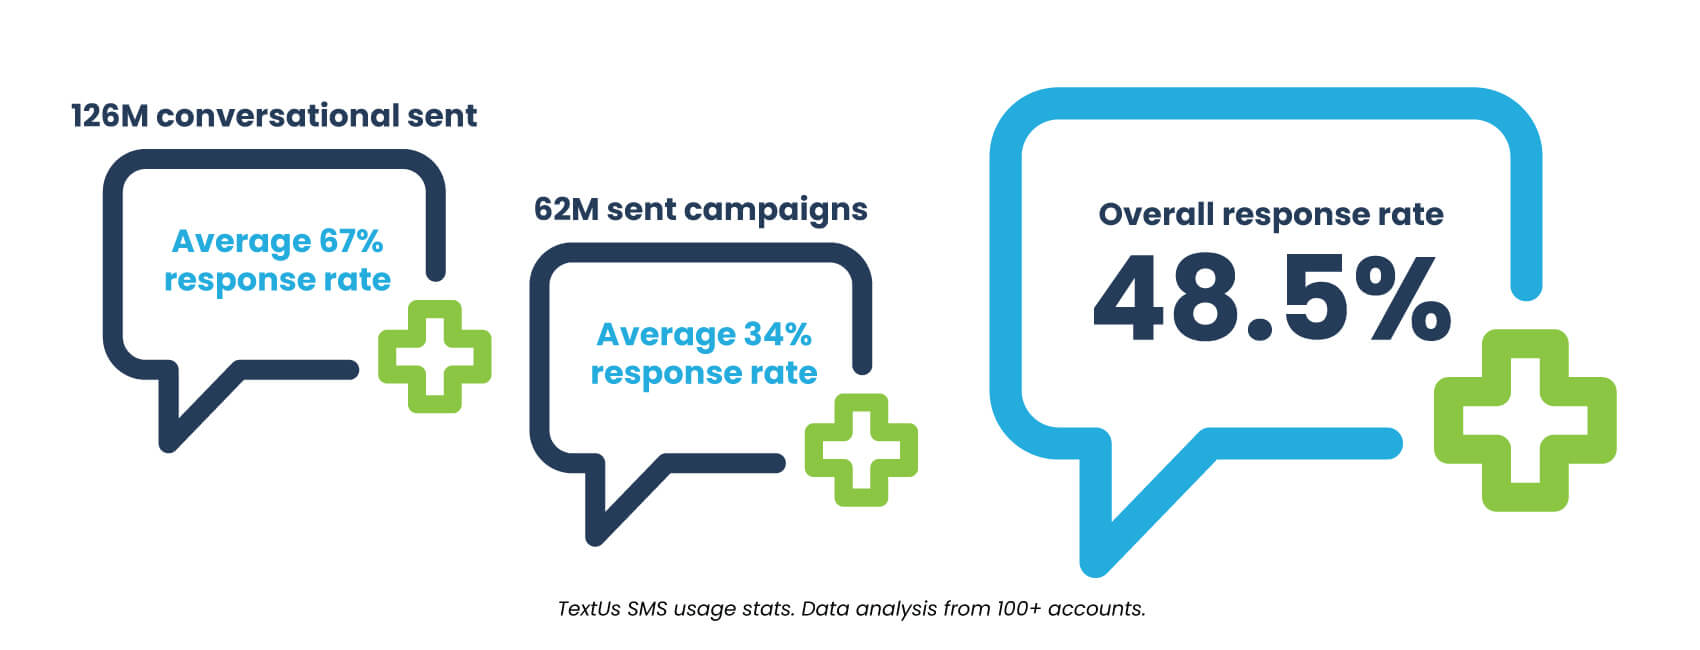 sms stats response rates